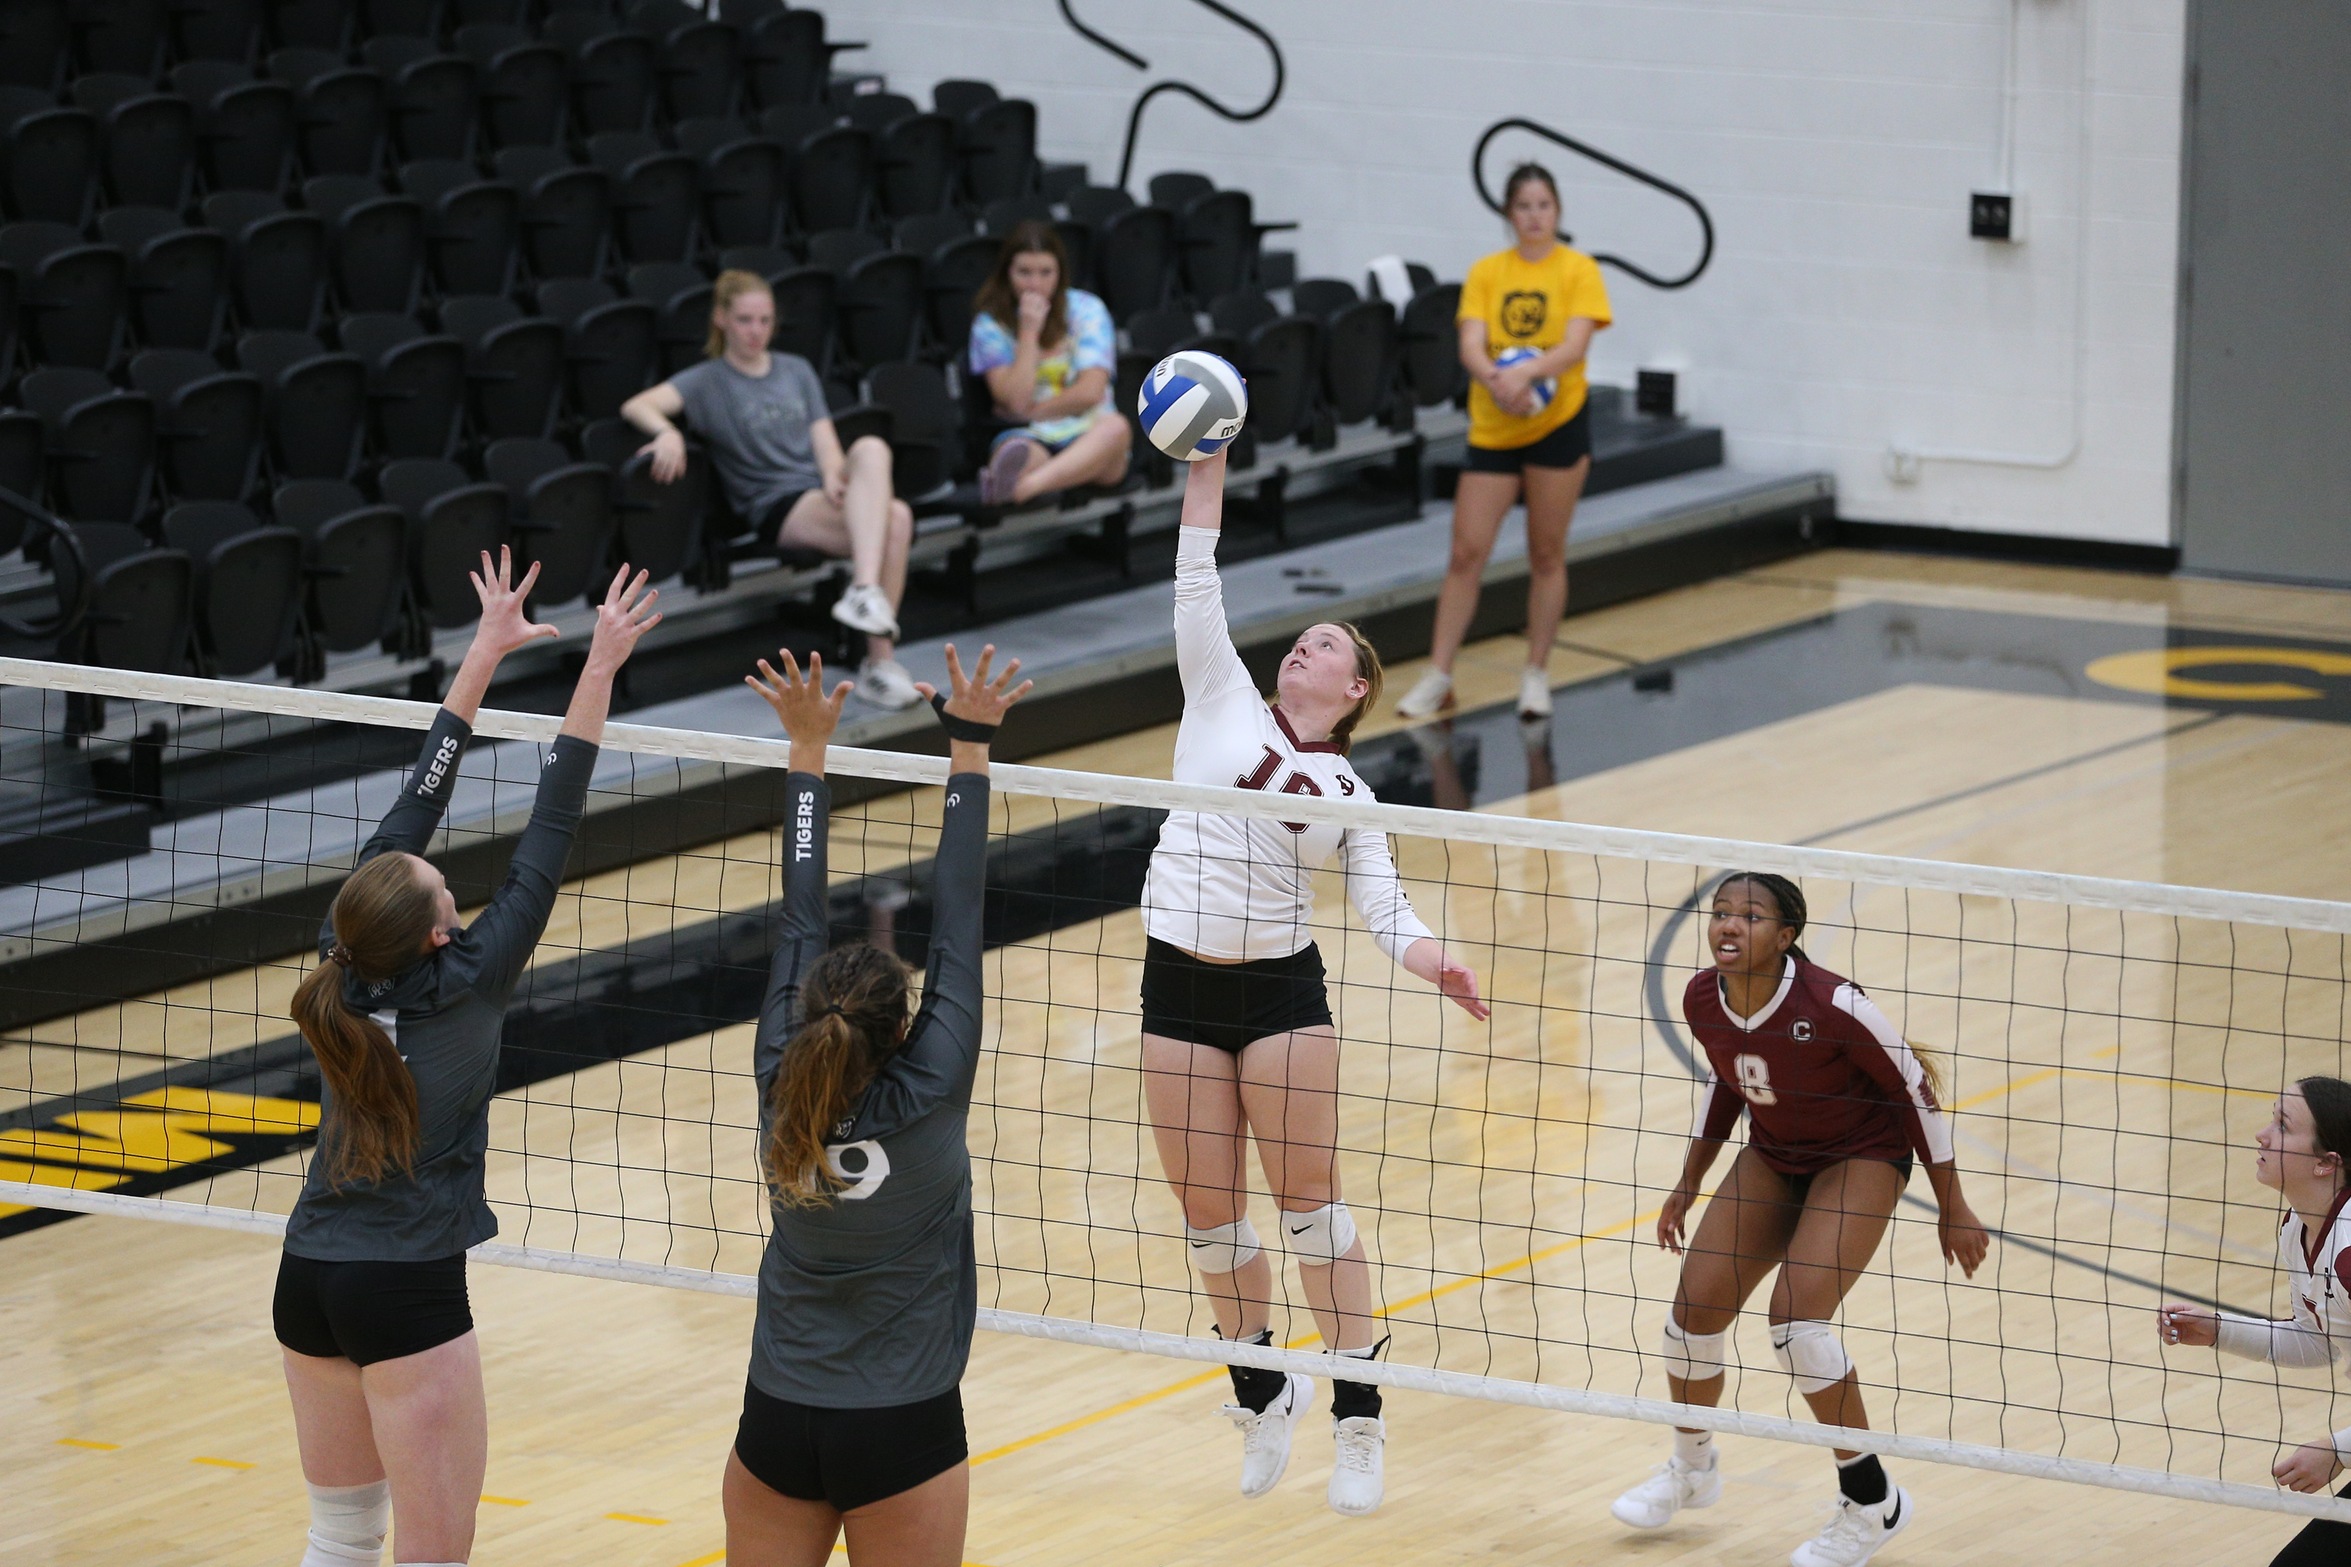 The Ladies fell 3-1 at home to LeTourneau on Tuesday. 

PHOTO: Charlie Lengal III